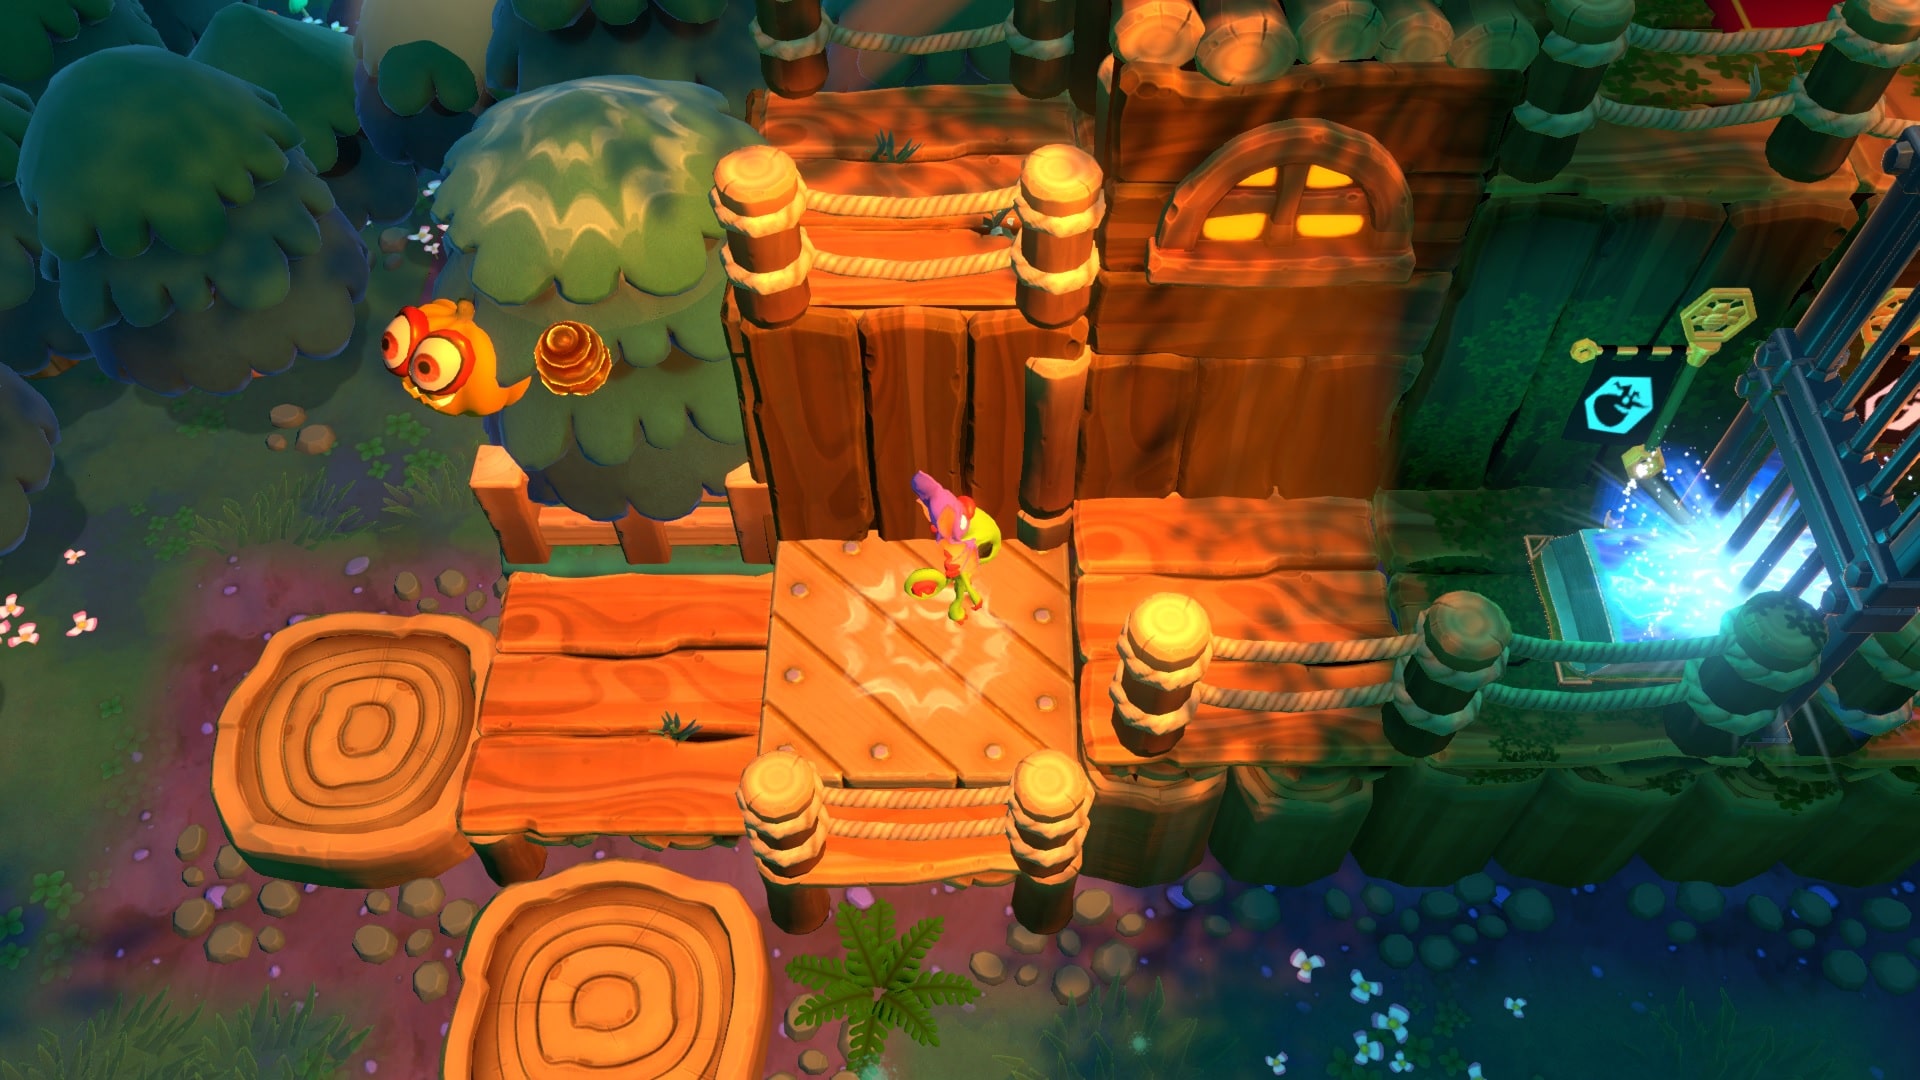 yooka-laylee and the impossible lair DA